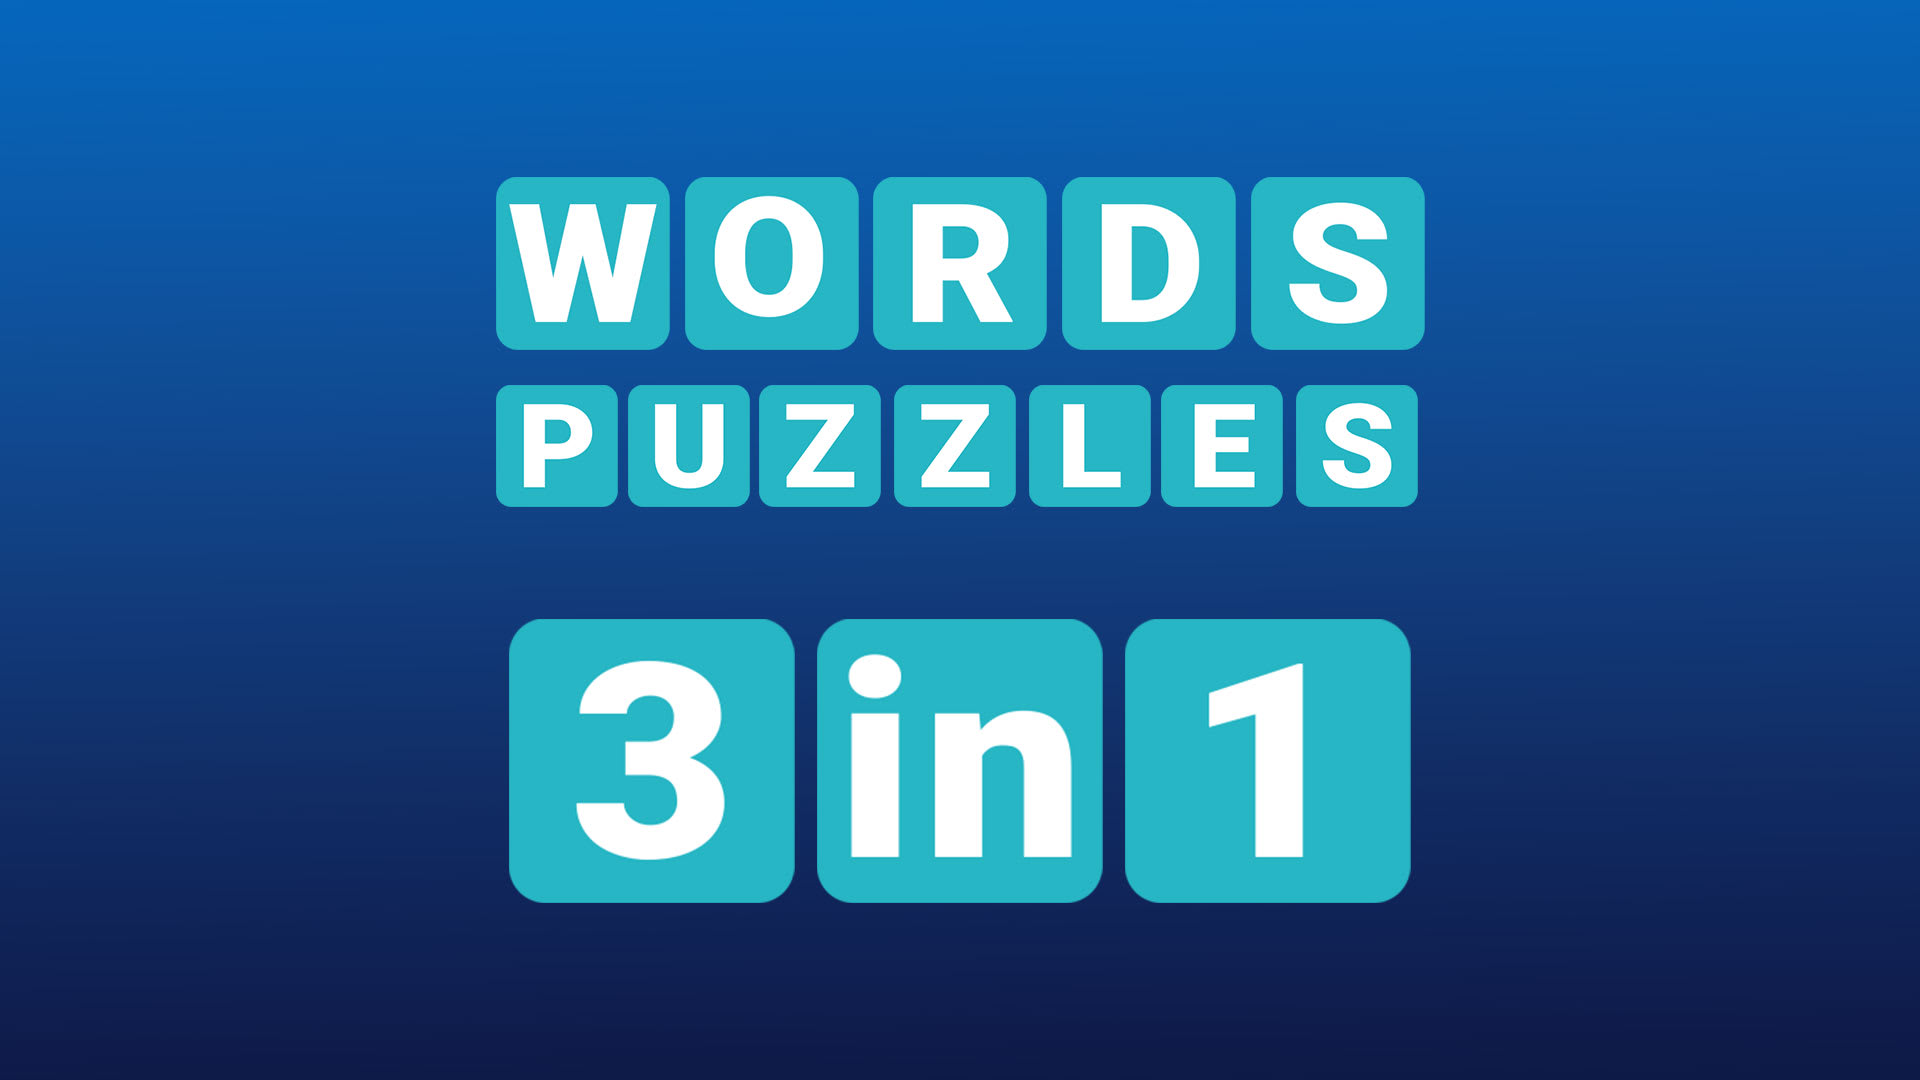 Words Puzzles 3 in 1 1